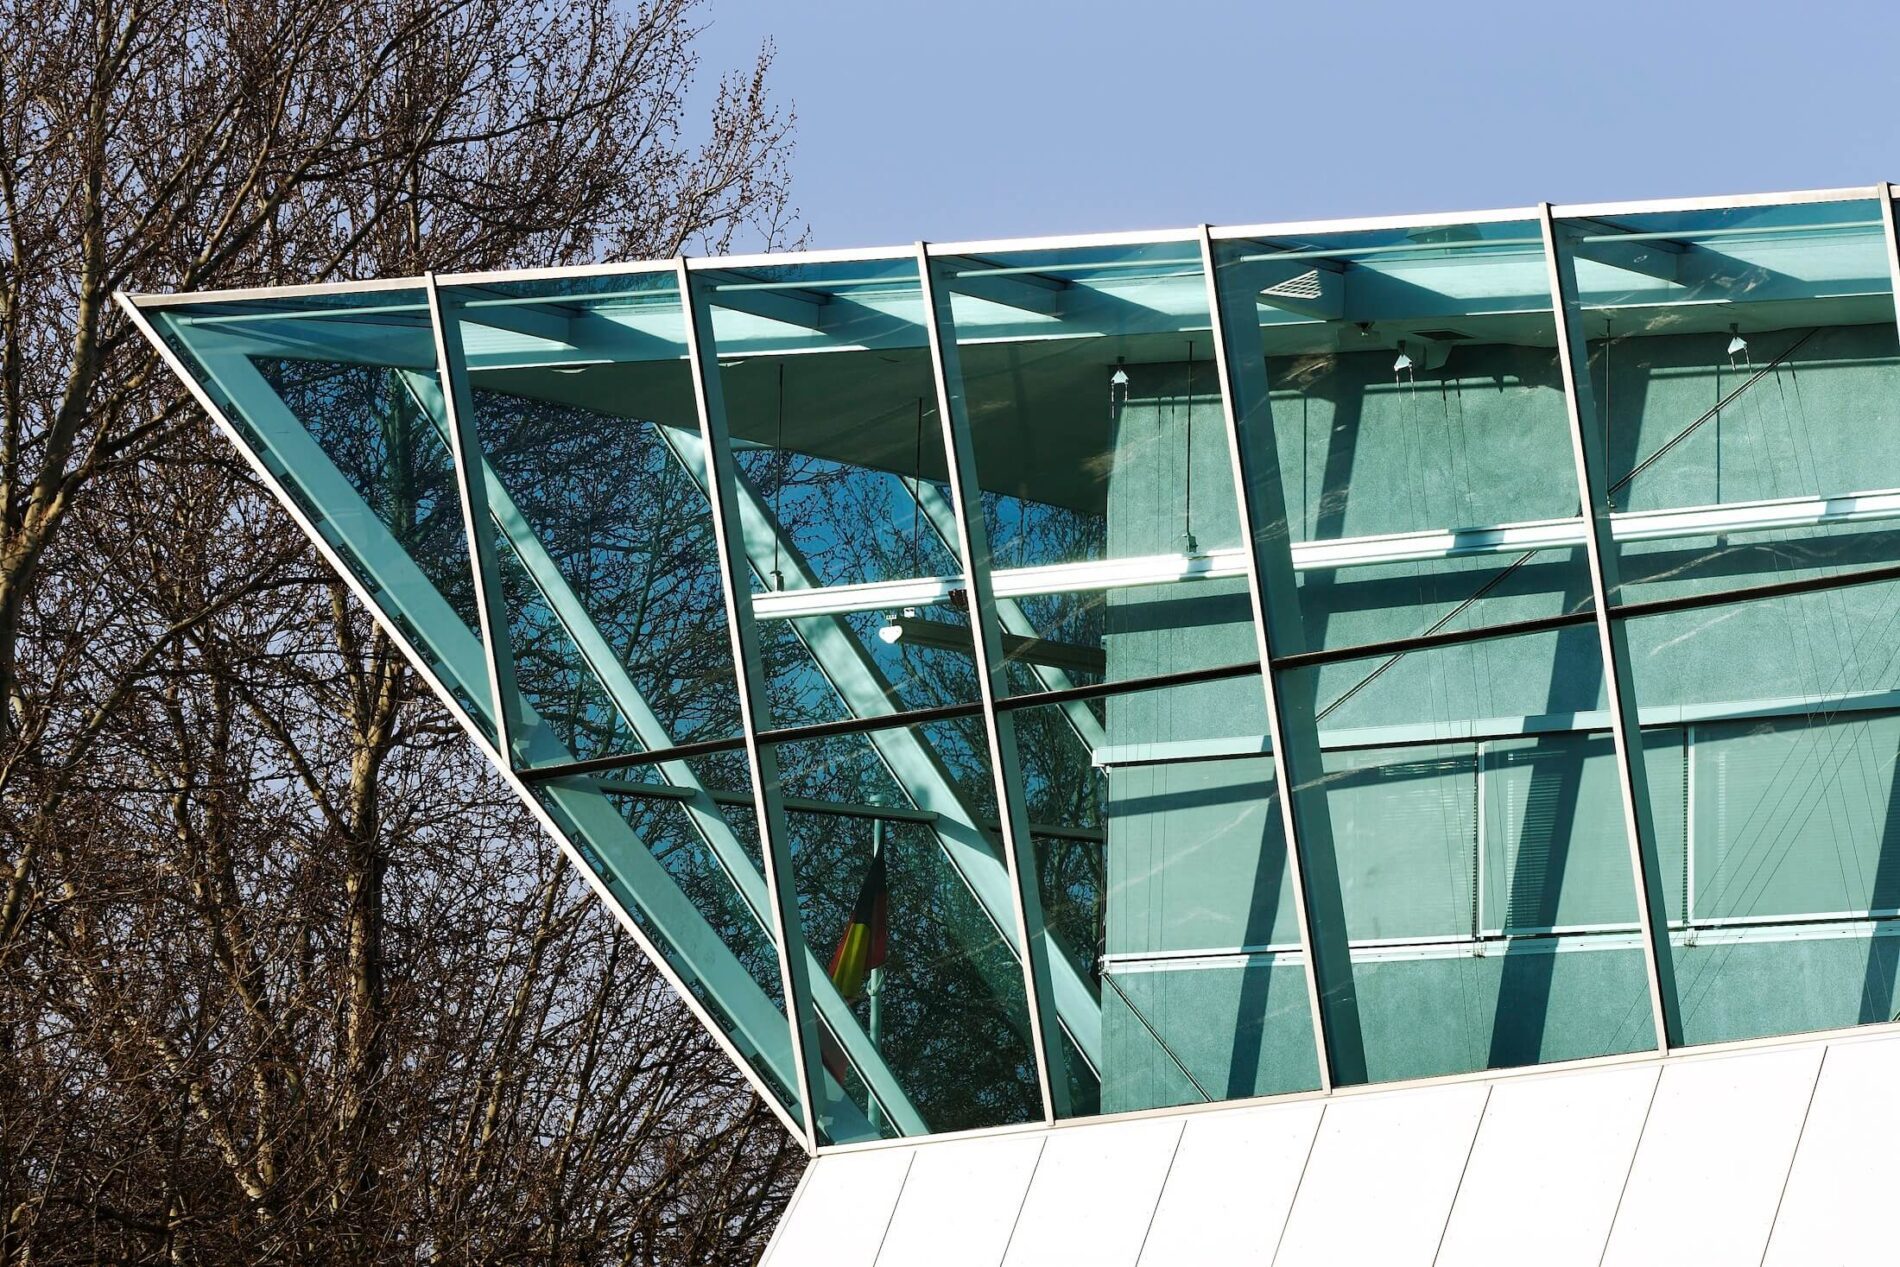 Angled glazing on double facade of police station complex